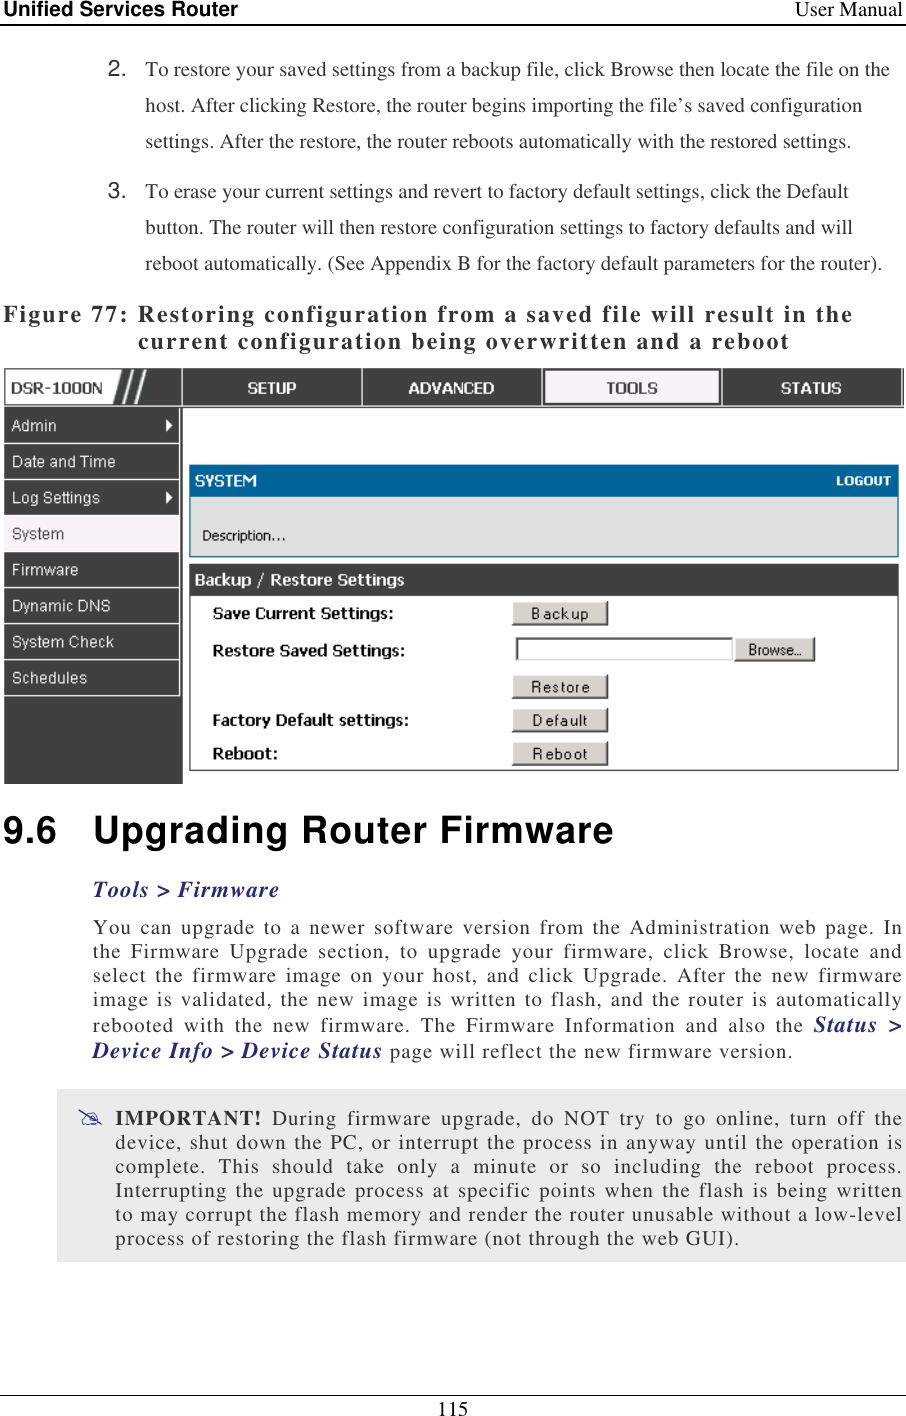 Unified Services Router    User Manual 115  2.  To restore your saved settings from a backup file, click Browse then locate the file on the host. After clicking Restore, the router begins importing the file’s saved configuration settings. After the restore, the router reboots automatically with the restored settings. 3.  To erase your current settings and revert to factory default settings, click the Default button. The router will then restore configuration settings to factory defaults and will reboot automatically. (See Appendix B for the factory default parameters for the router). Figure 77: Restoring configuration from a saved file will result in the current configuration being overwritten and a reboot  9.6  Upgrading Router Firmware Tools &gt; Firmware You can  upgrade  to a  newer  software  version  from  the Administration  web  page.  In the  Firmware  Upgrade  section,  to  upgrade  your  firmware,  click  Browse,  locate  and select  the  firmware  image  on  your  host,  and  click  Upgrade.  After  the  new  firmware image is validated, the new image is written to flash,  and the router is automatically rebooted  with  the  new  firmware.  The  Firmware  Information  and  also  the  Status  &gt; Device Info &gt; Device Status page will reflect the new firmware version.  IMPORTANT!  During  firmware  upgrade,  do  NOT  try  to  go  online,  turn  off  the device, shut down the PC, or interrupt the process in anyway until the operation is complete.  This  should  take  only  a  minute  or  so  including  the  reboot  process. Interrupting the  upgrade process  at  specific  points  when  the flash is being  written to may corrupt the flash memory and render the router unusable without a low-level process of restoring the flash firmware (not through the web GUI). 